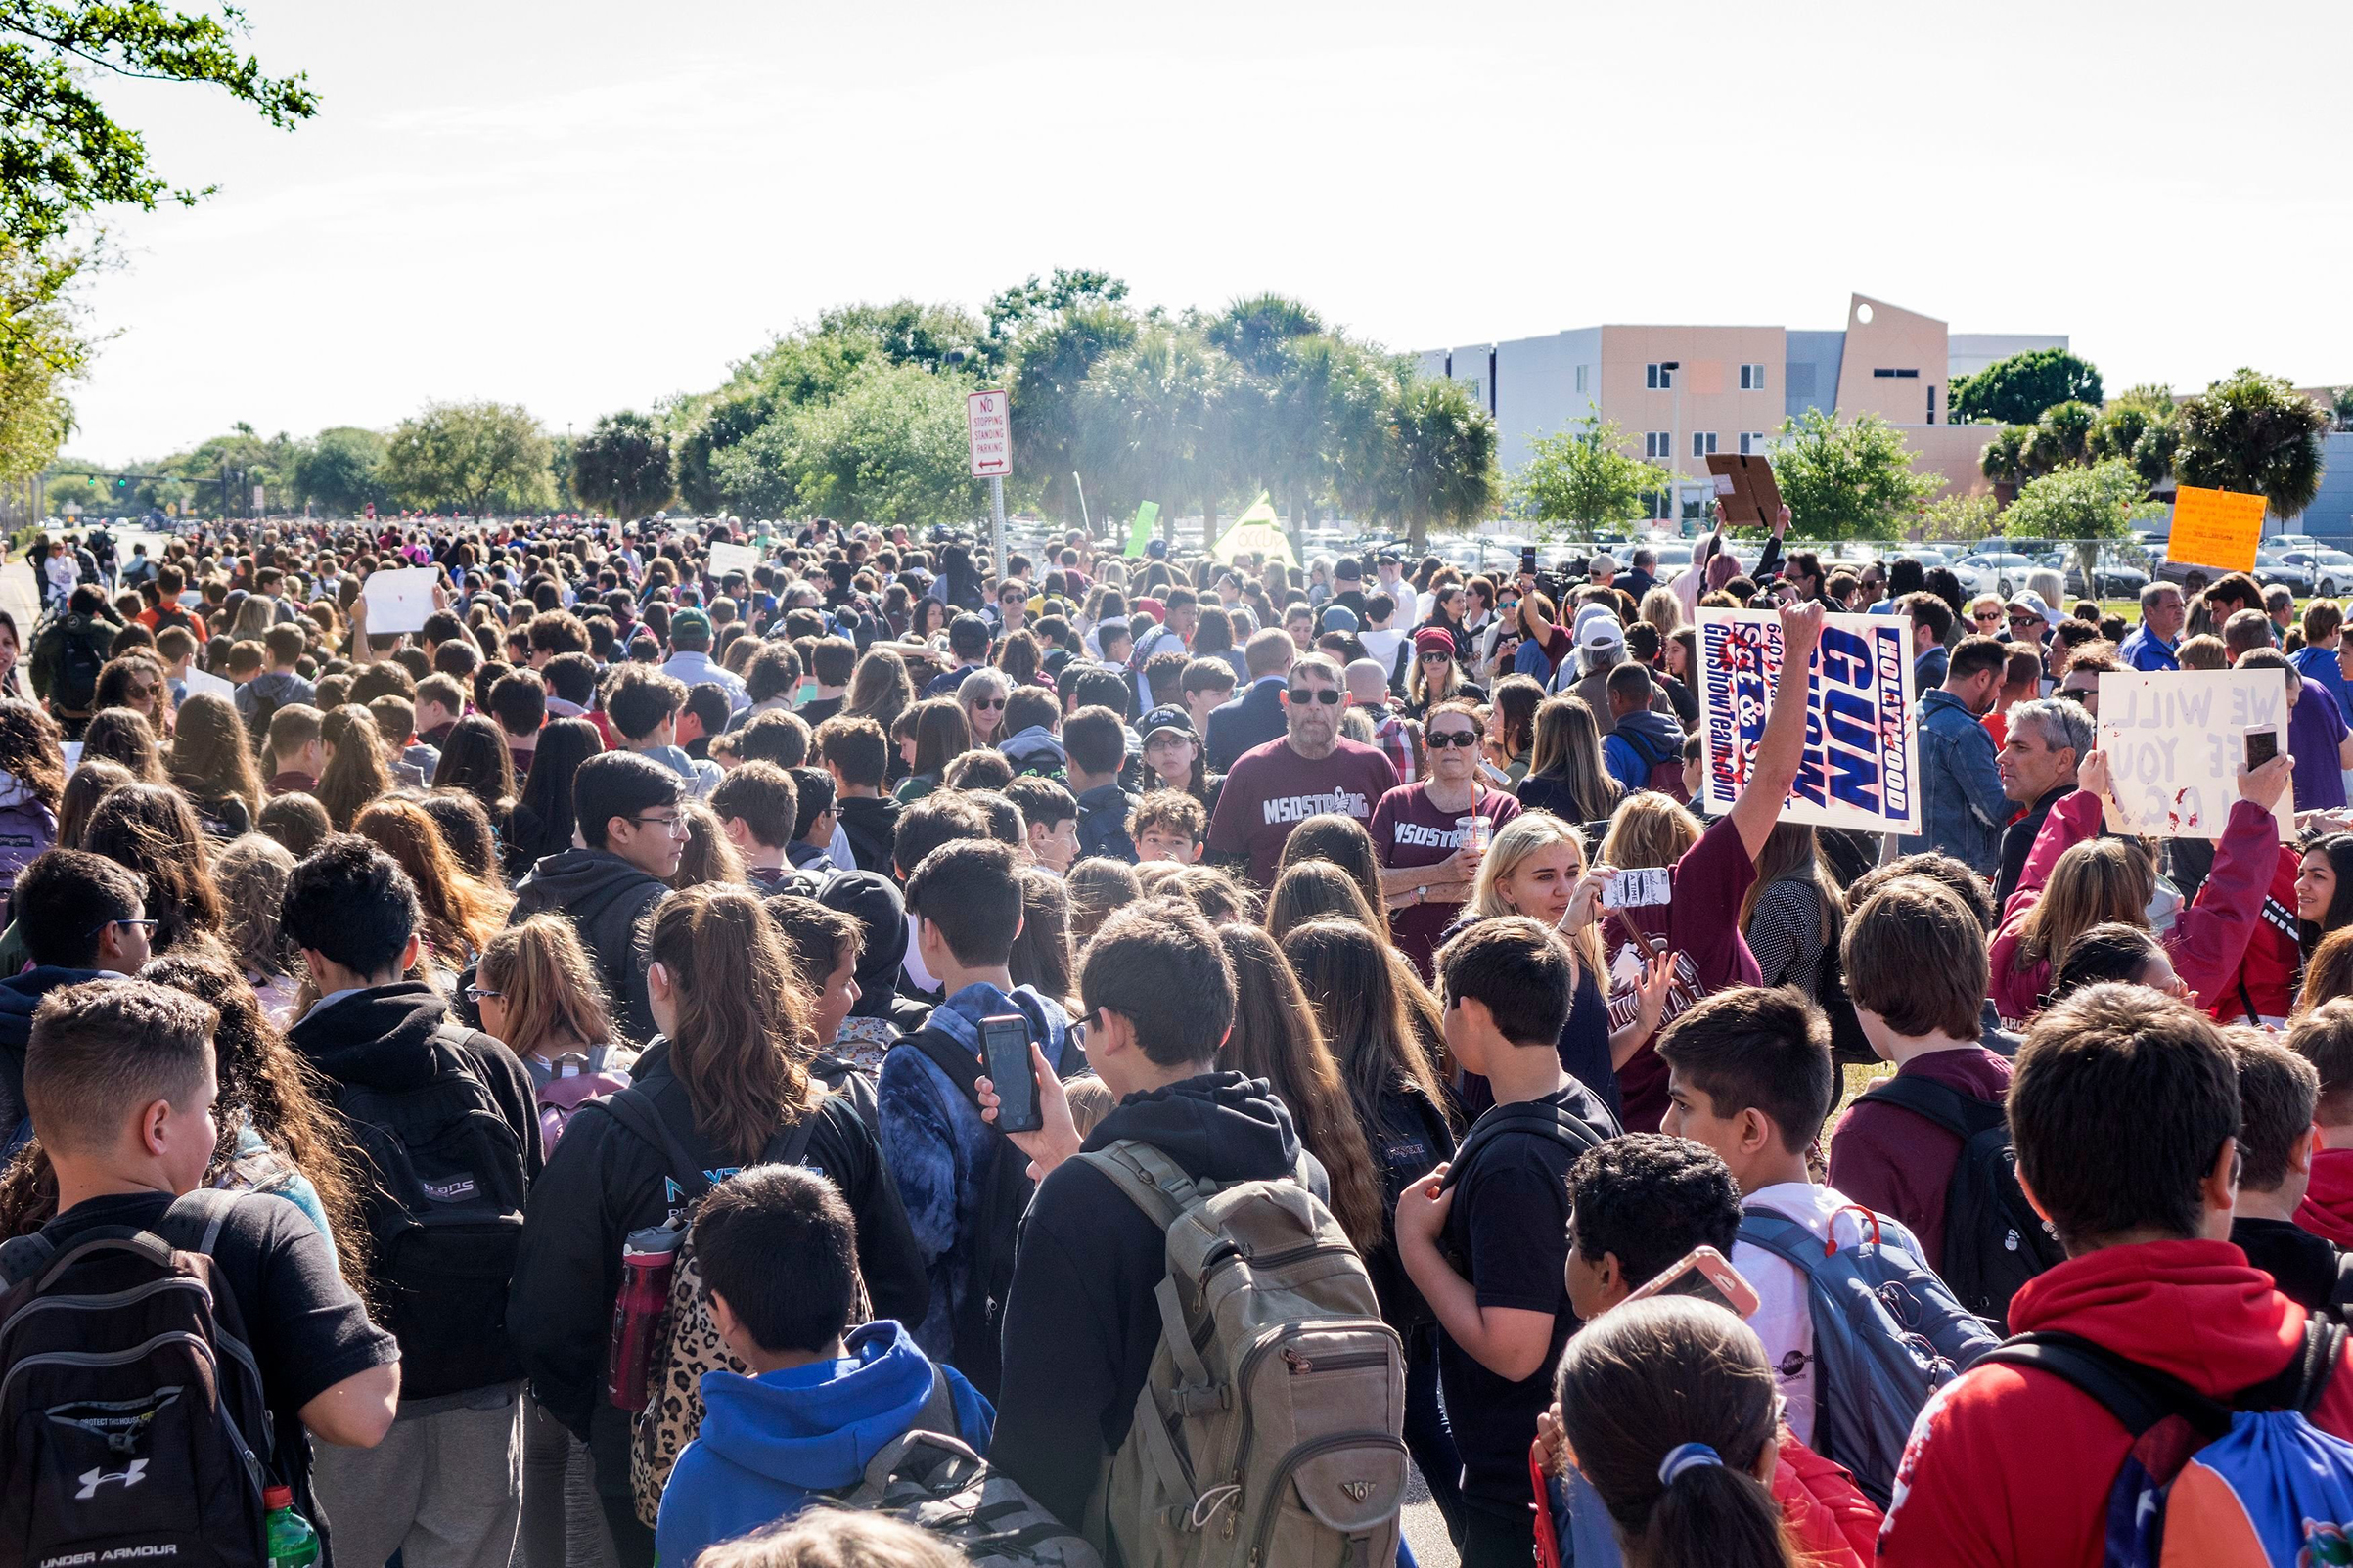 Community members and students participate in the national school walkout outside the Marjory Stoneman Douglas High School in Parkland, Fla., on March 14, 2018. (Cristobal Herrera—EPA-EFE/Shutterstock)